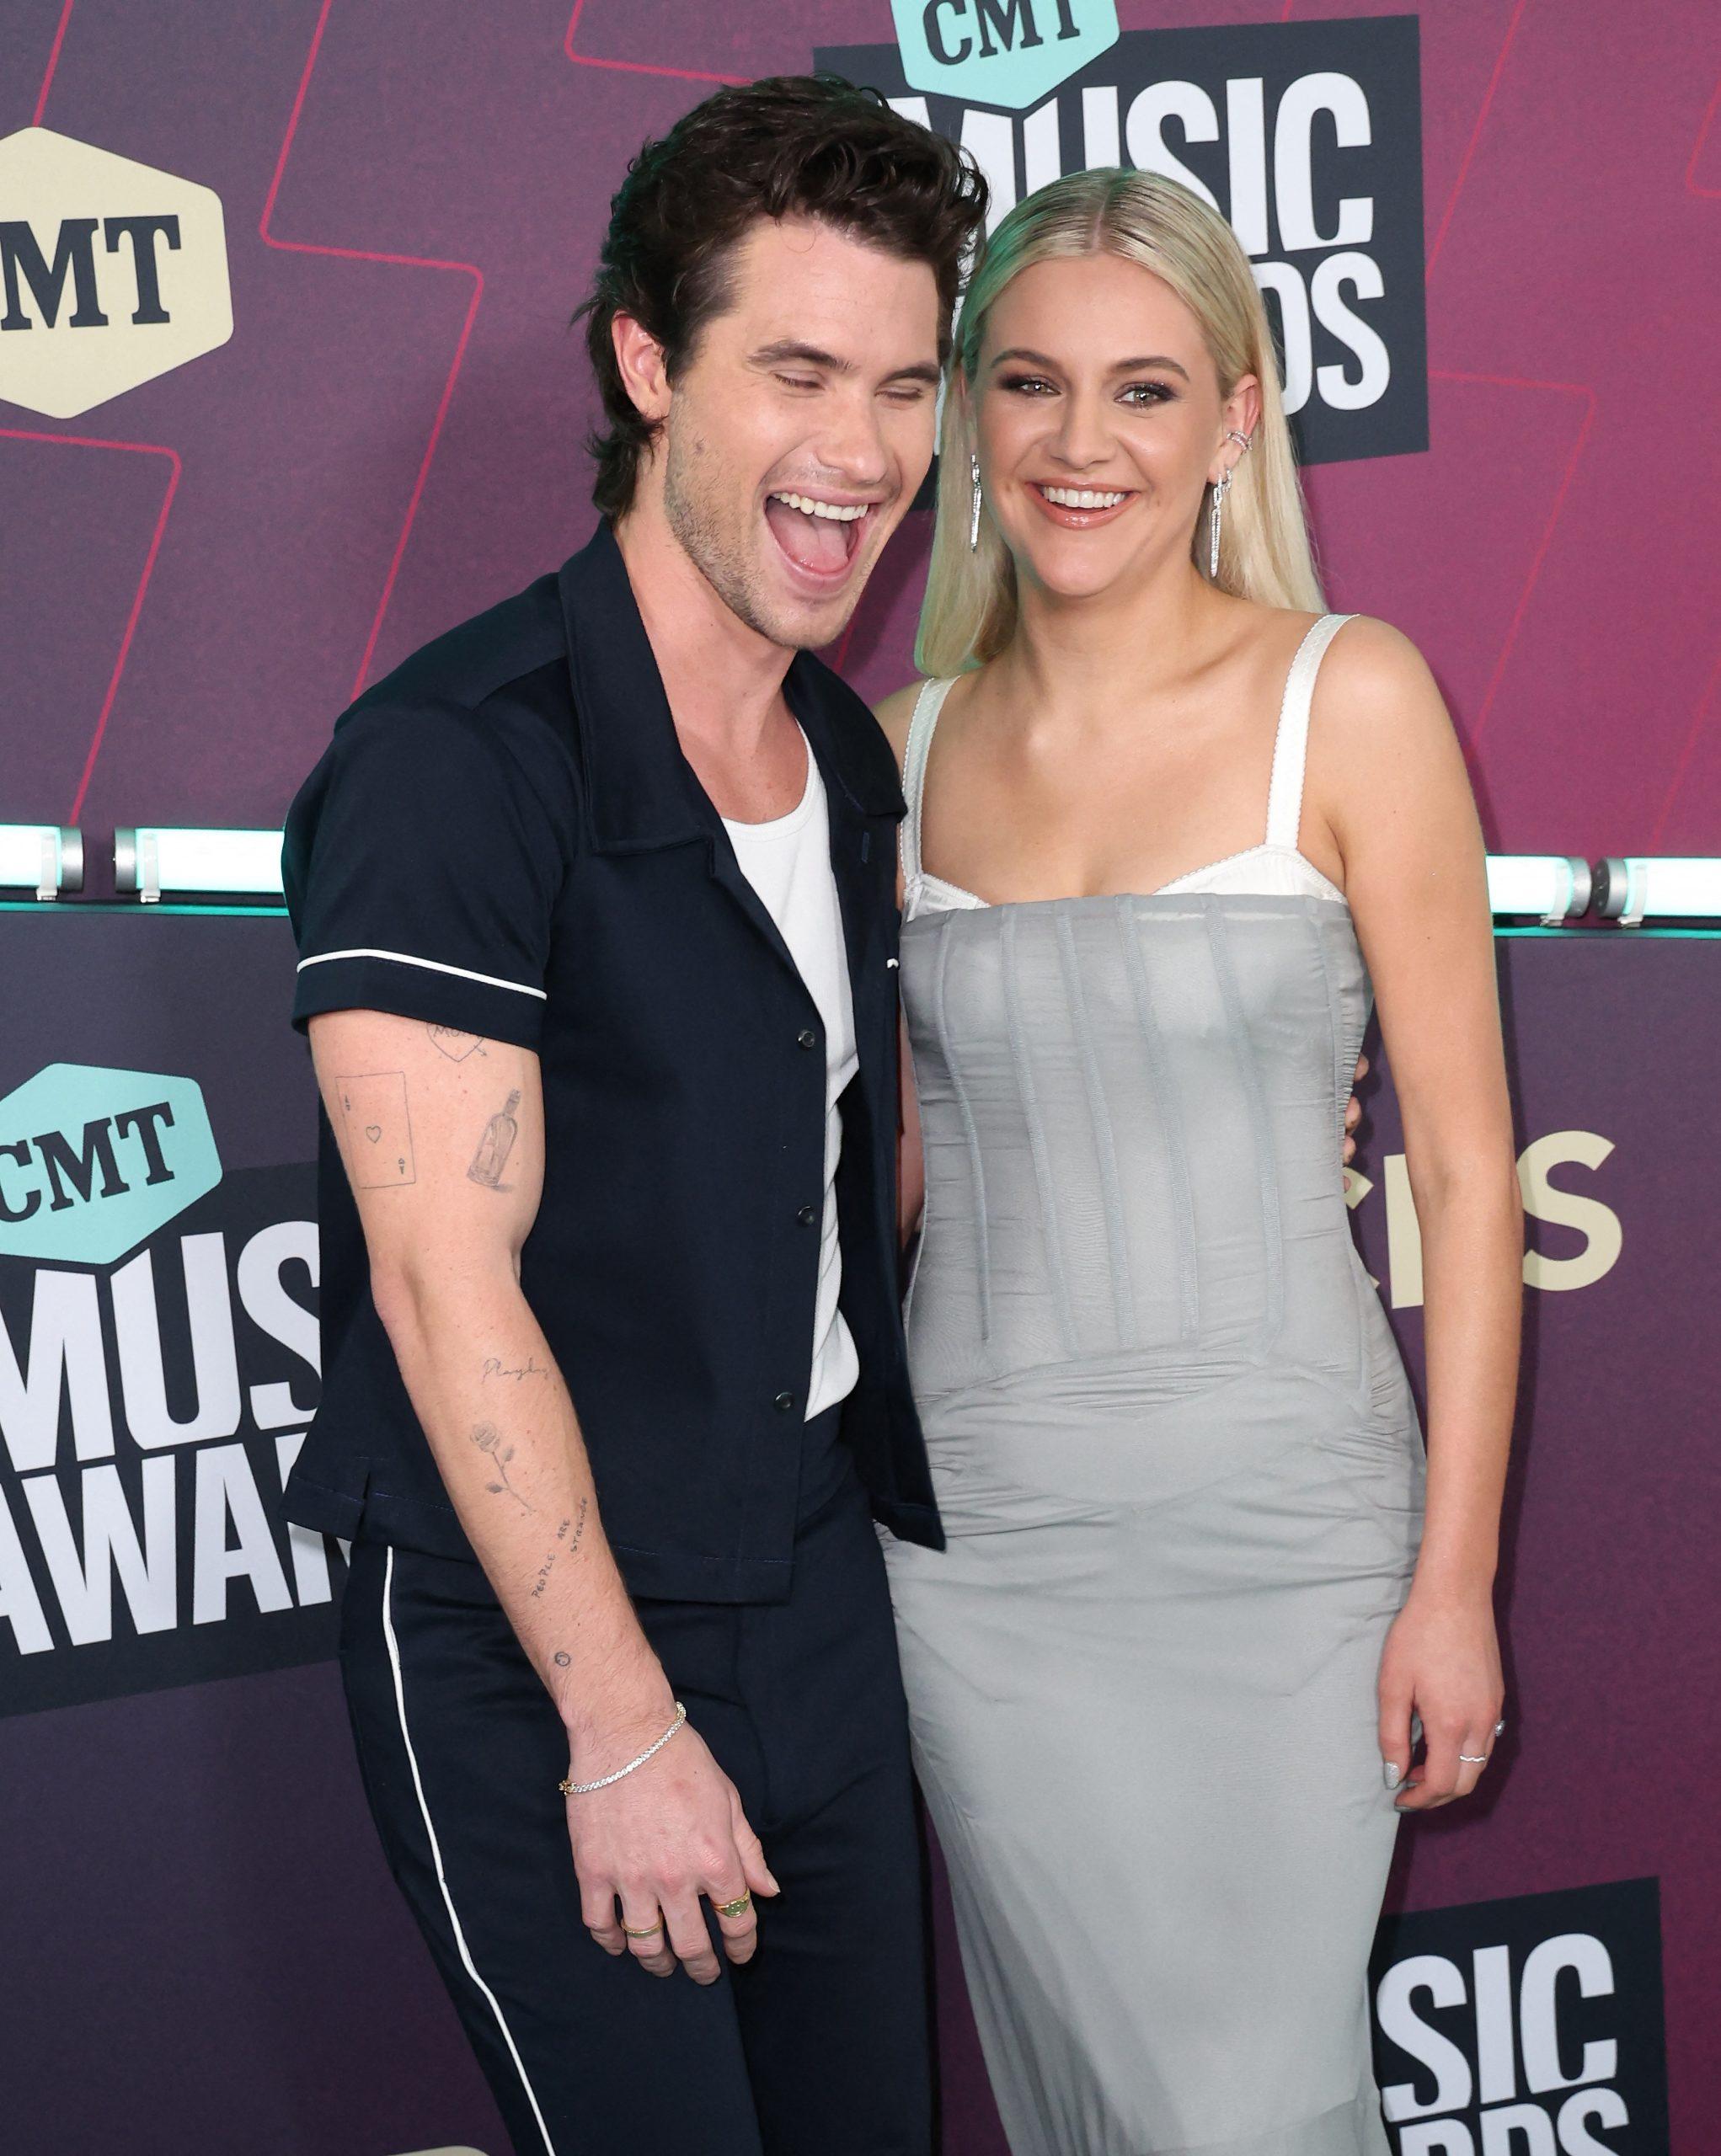 Chase Stokes and Kelsea Ballerini at the 2023 CMT Music Awards